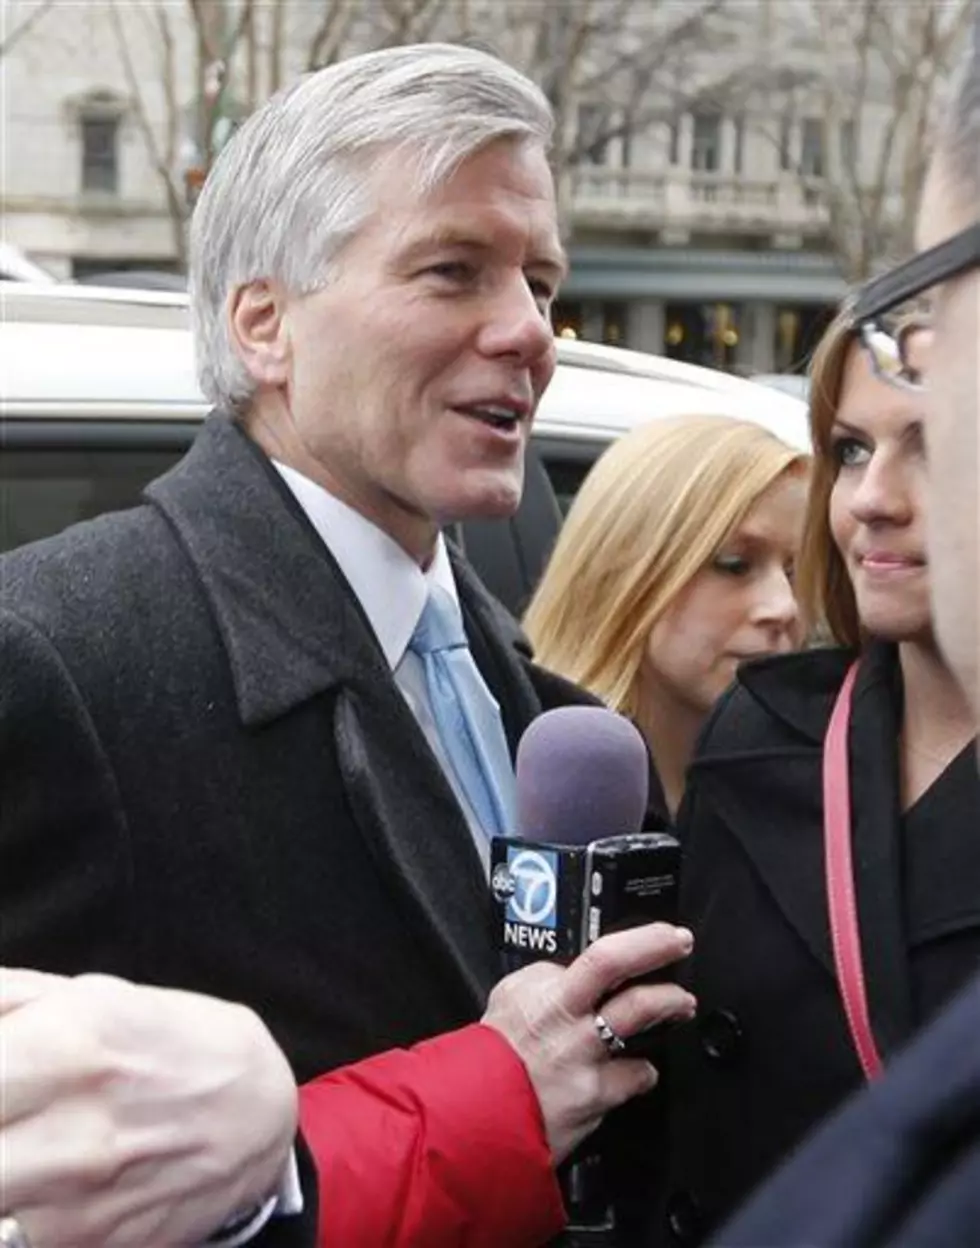 Ex-Virginia Gov. McDonnell gets 2 years for corruption